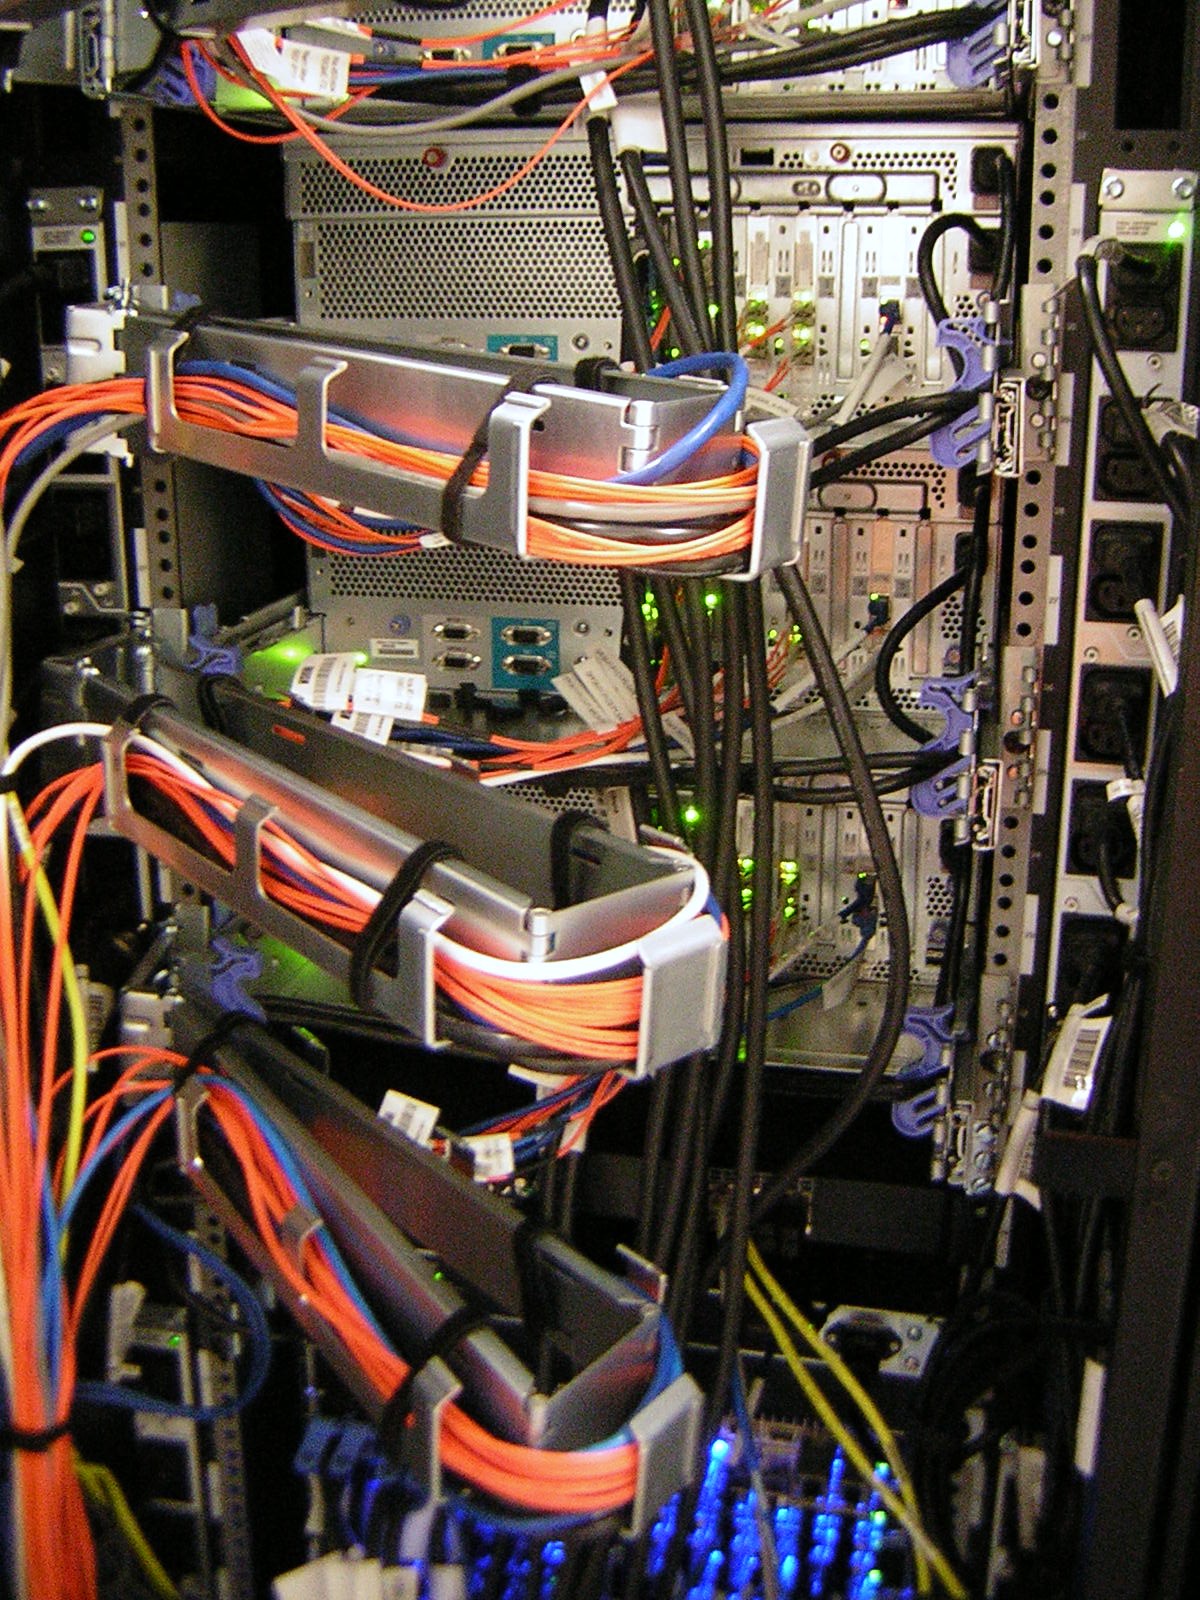 Cable arms [Credit: SciNet, University of Toronto]